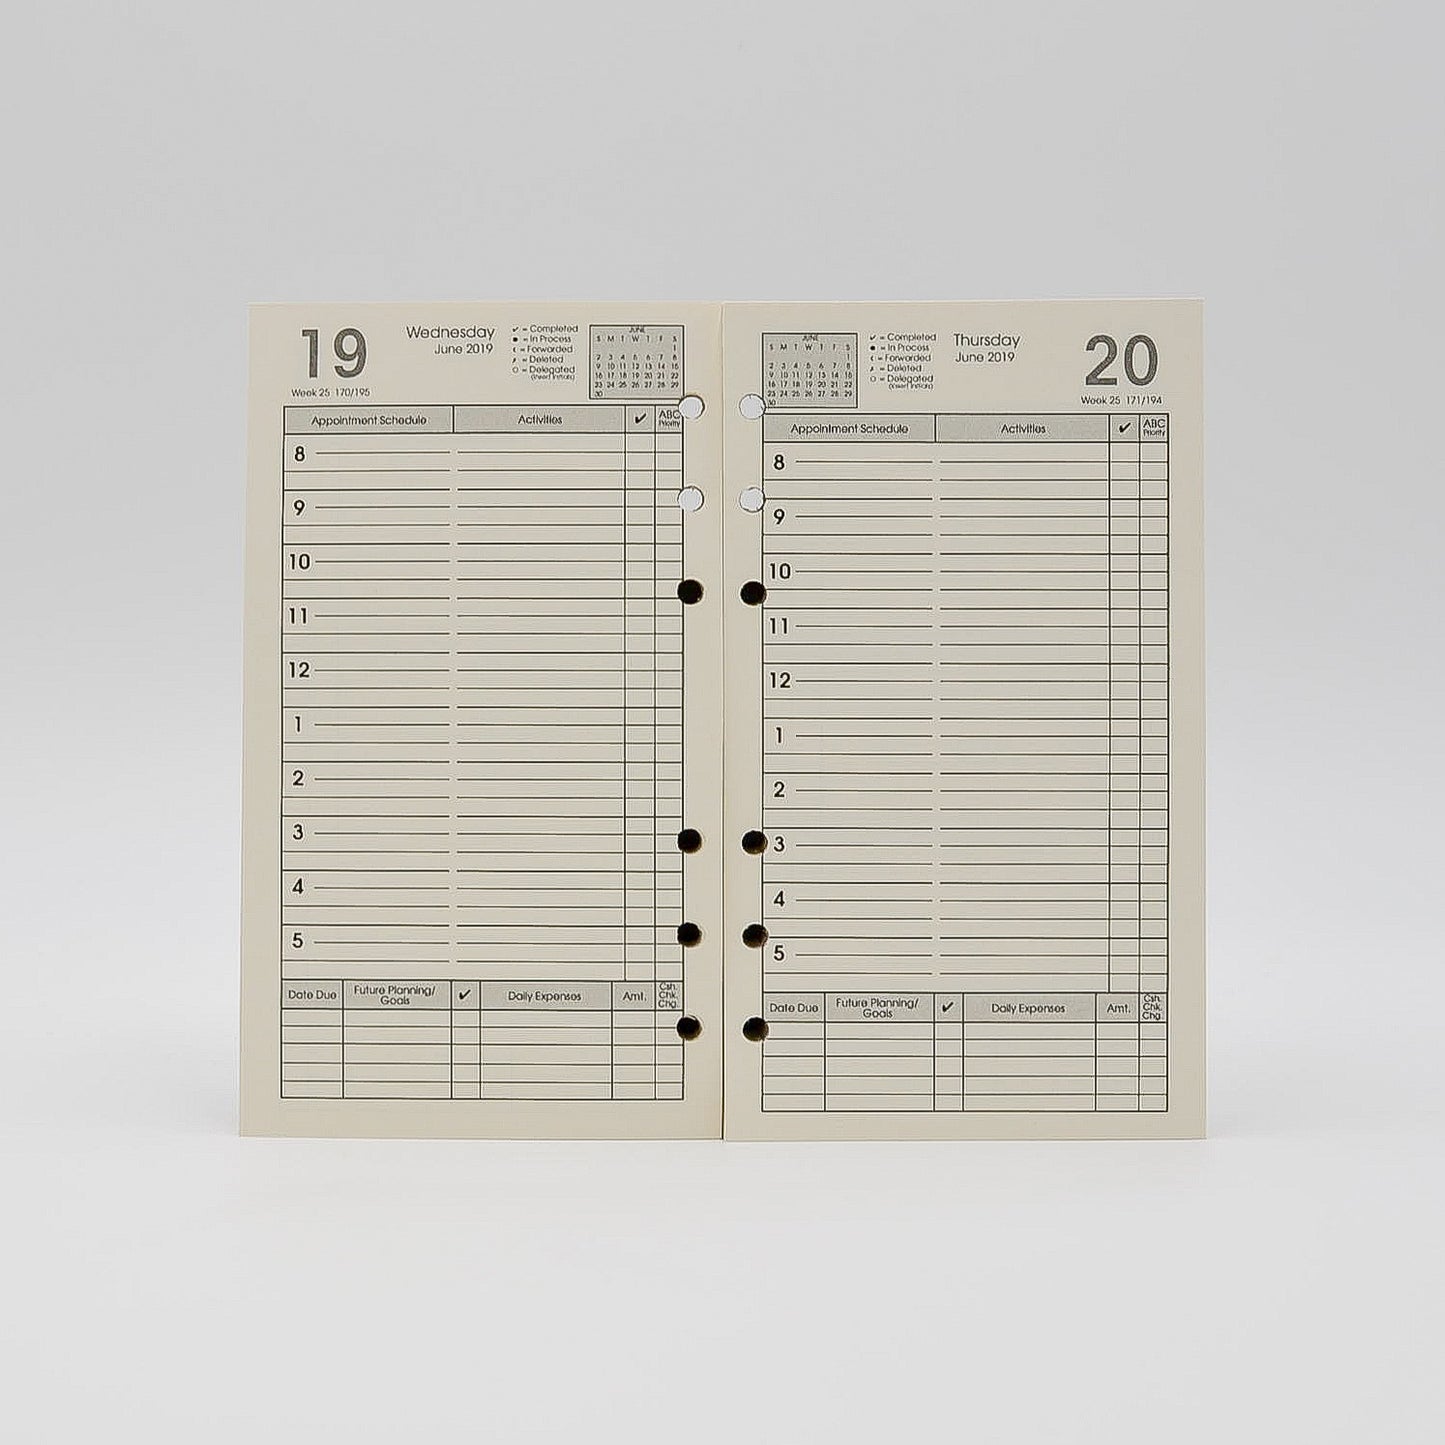 Preference Collection DD646-3-3/4 X 6-3/4 6-hole Daily Planner ivory 6 ring loose leaf calendar 2019 2020